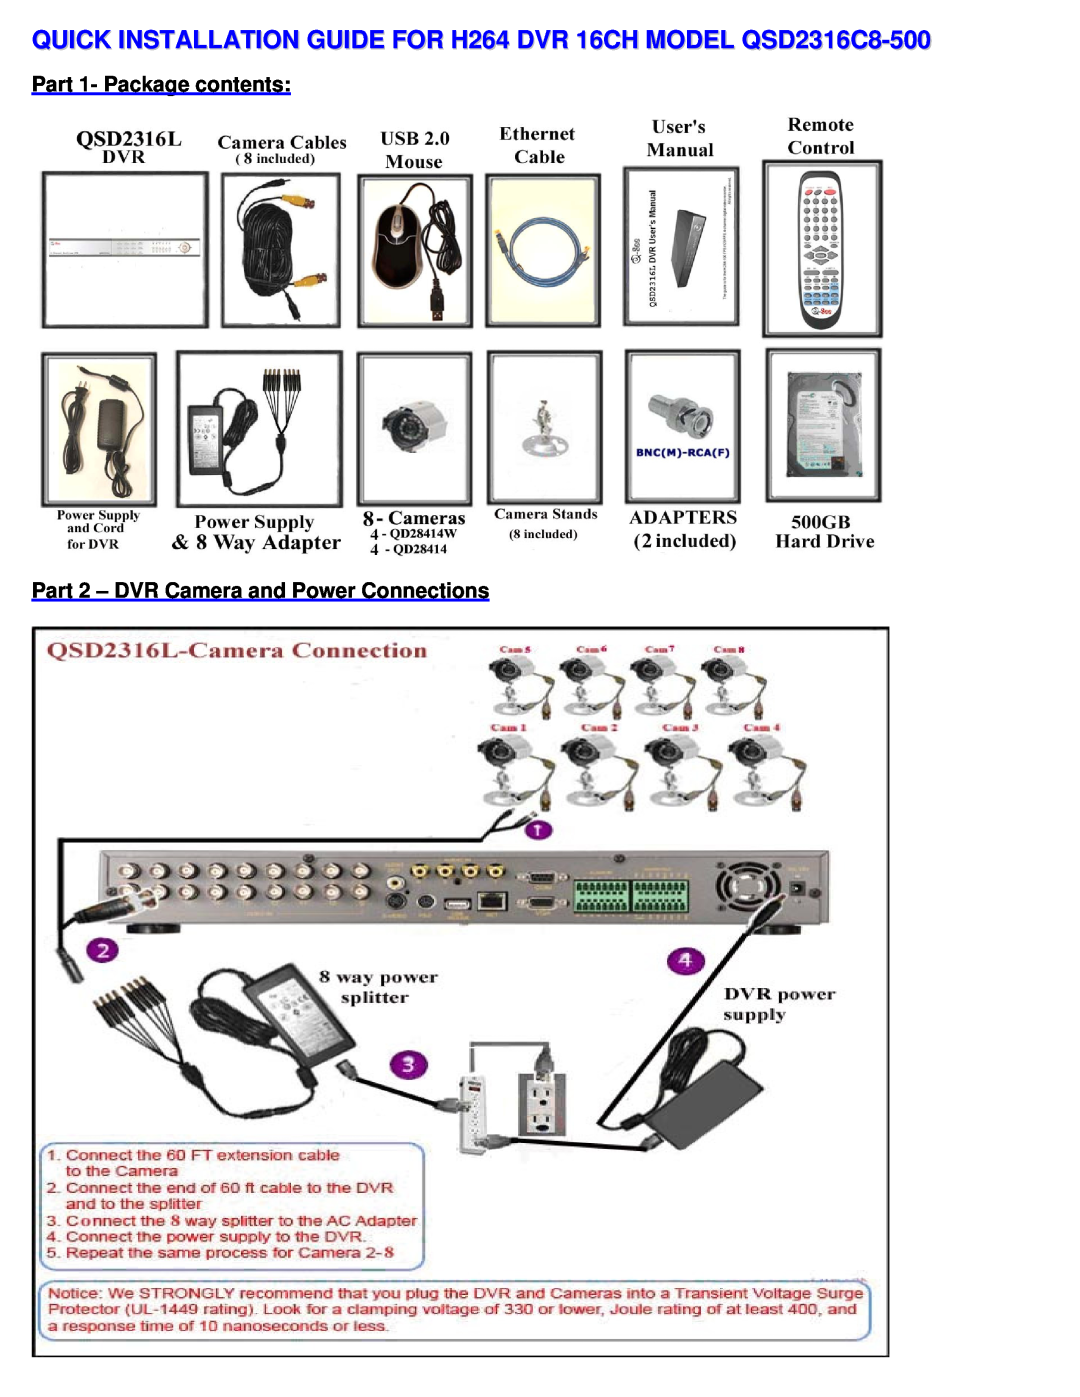 Q-See QSD2316C8-500 manual Part 1- Package contents Part 2 - DVR Camera and Power Connections 